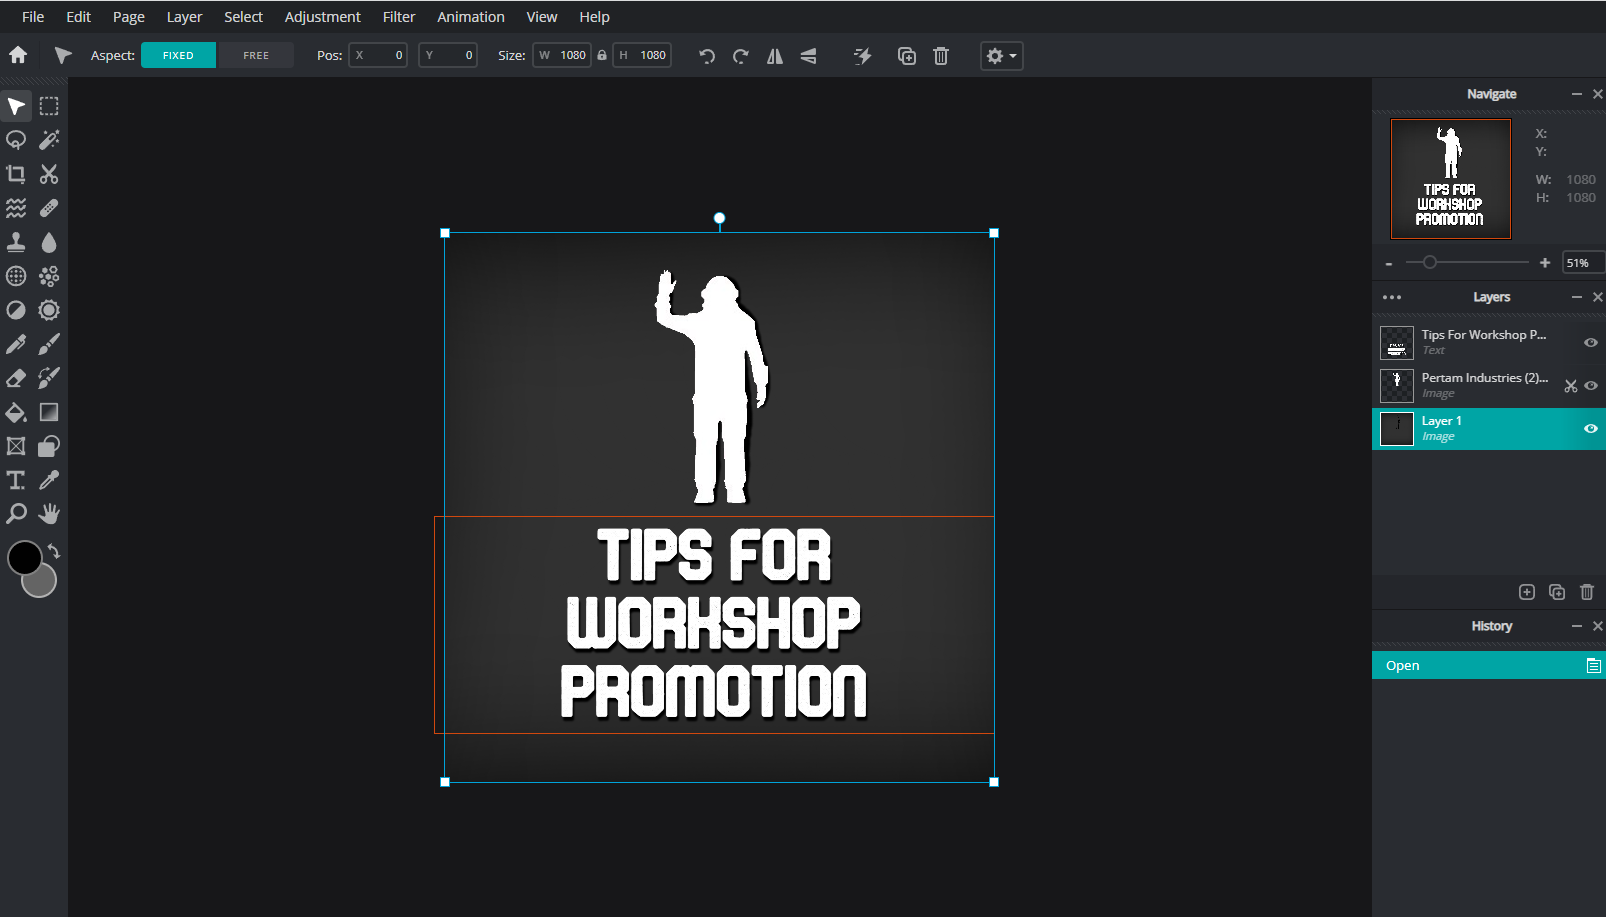 Space Engineers How to Promote Your Designs Tips - Tip 5 